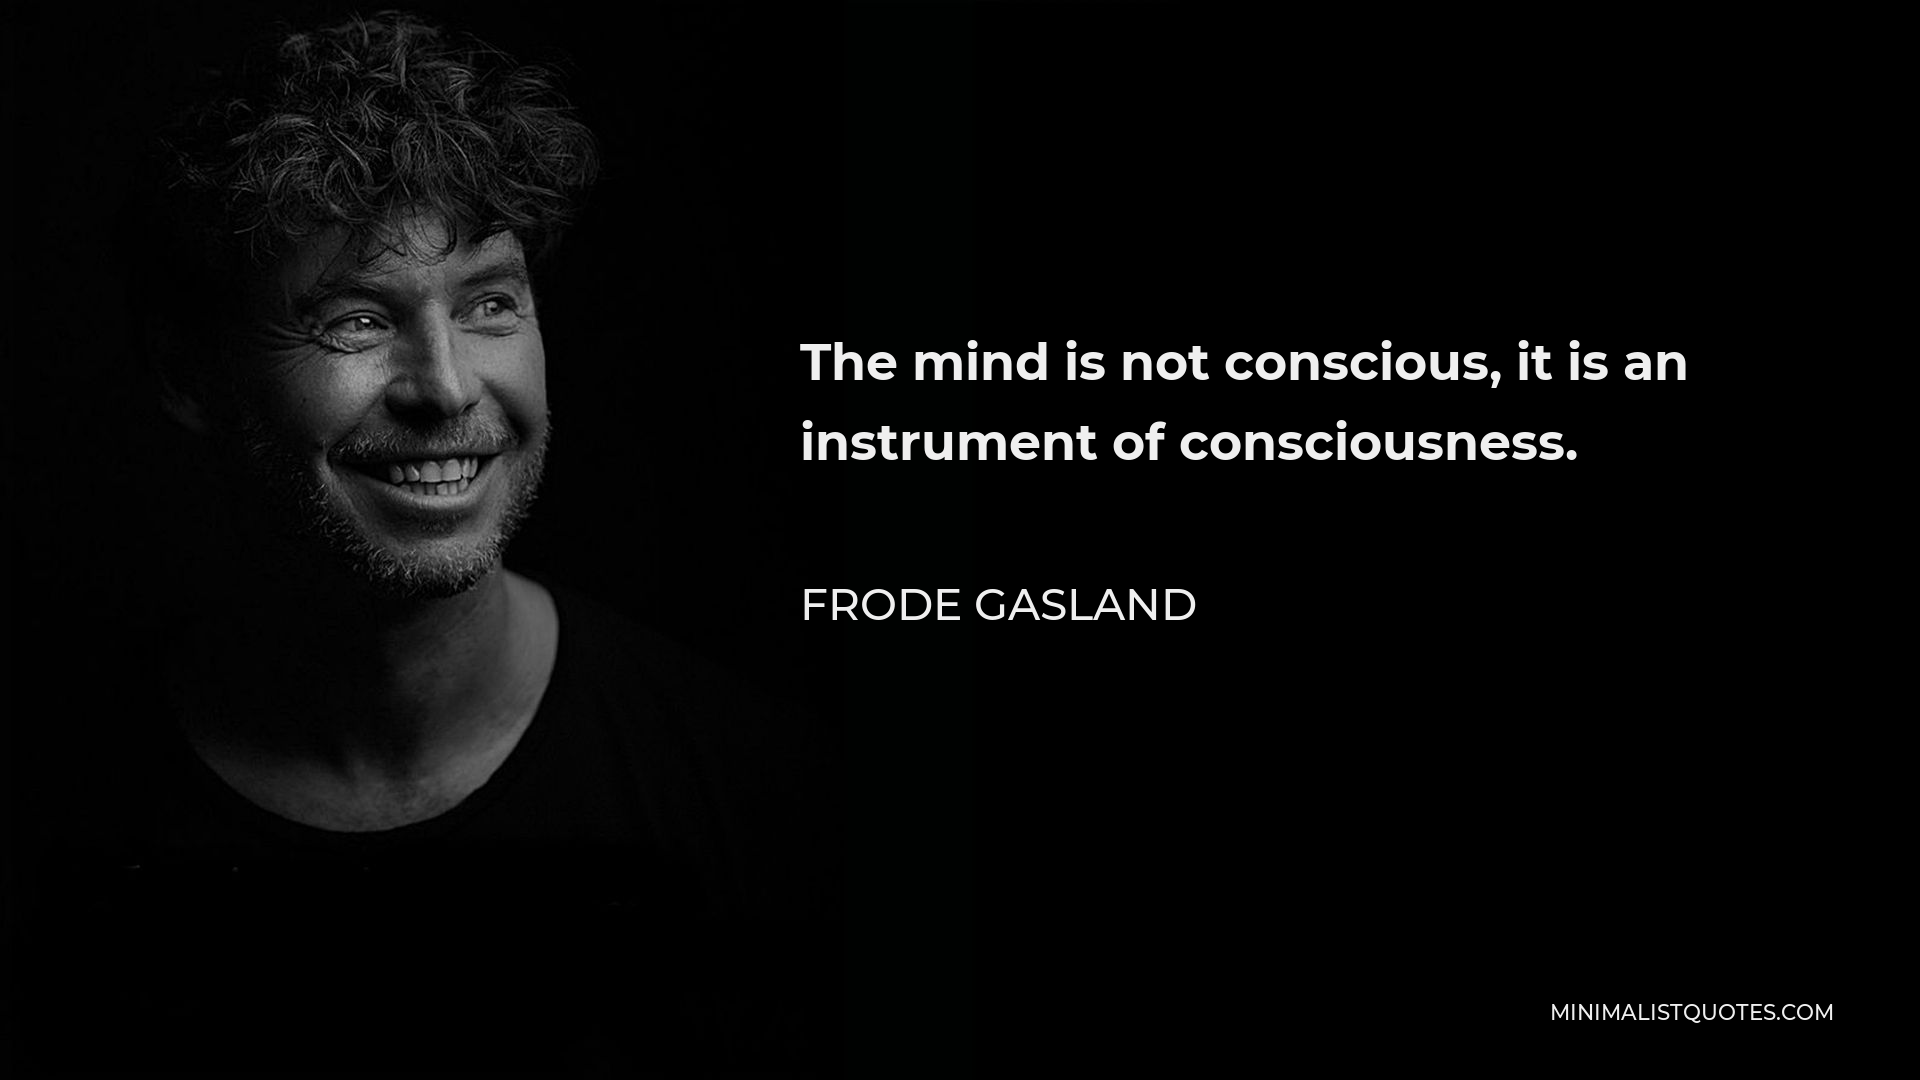 Frode Gasland Quote - The mind is not conscious, it is an instrument of consciousness.